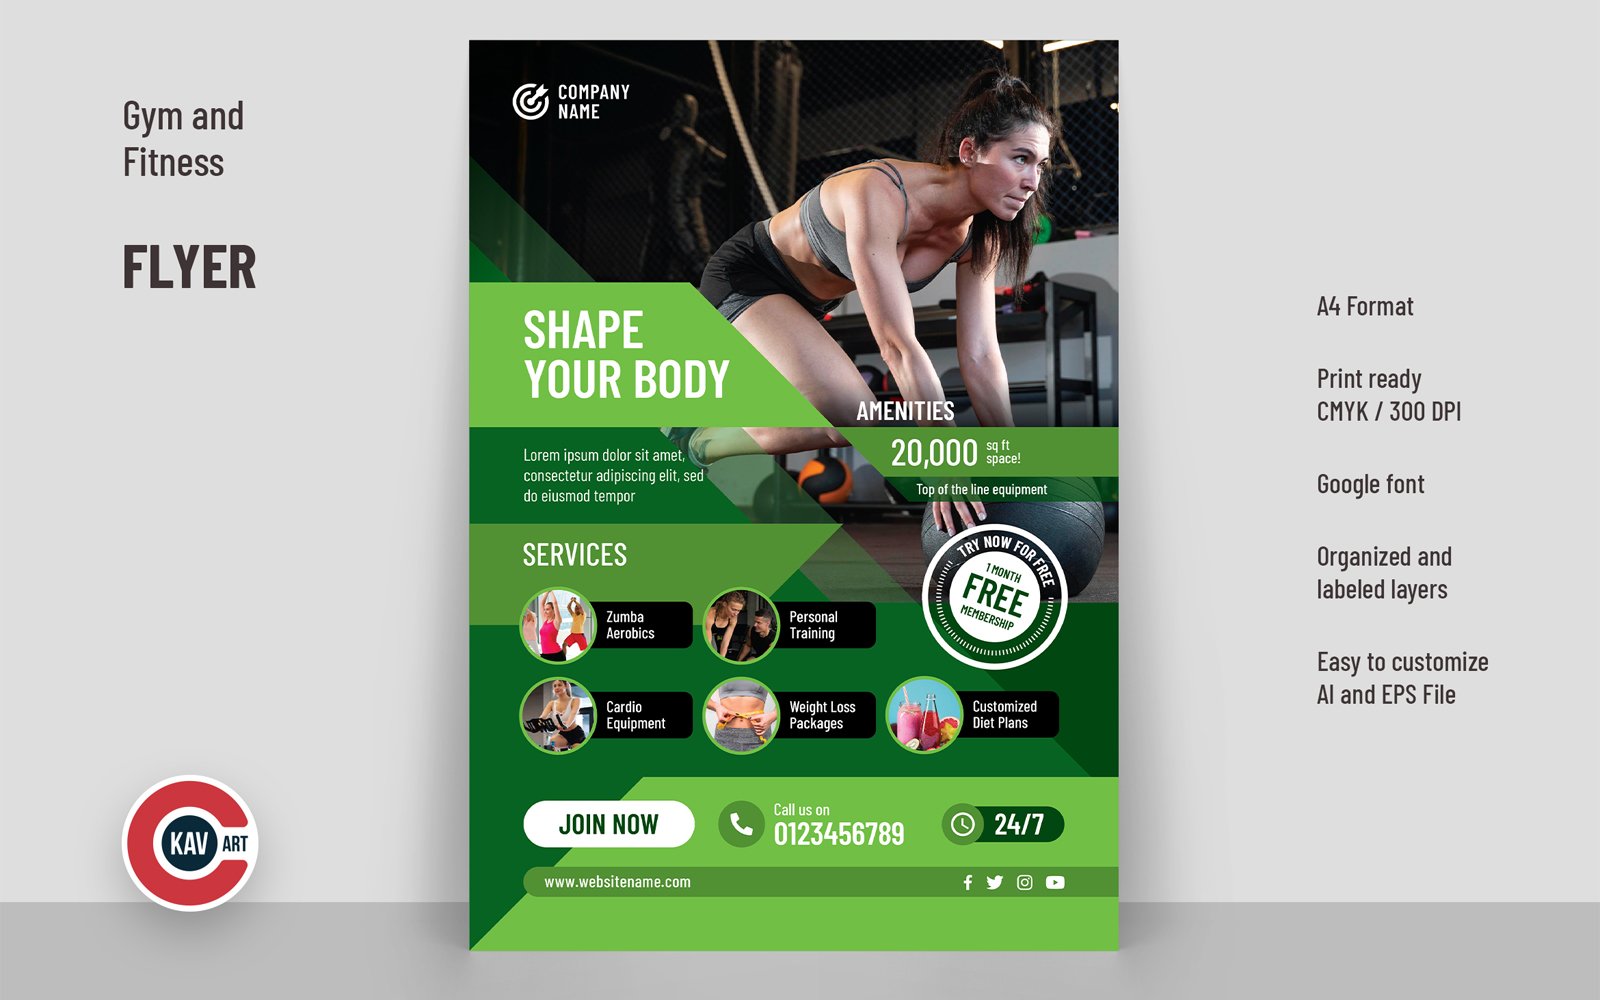 Gym and Fitness Flyer or Poster Template - 00221